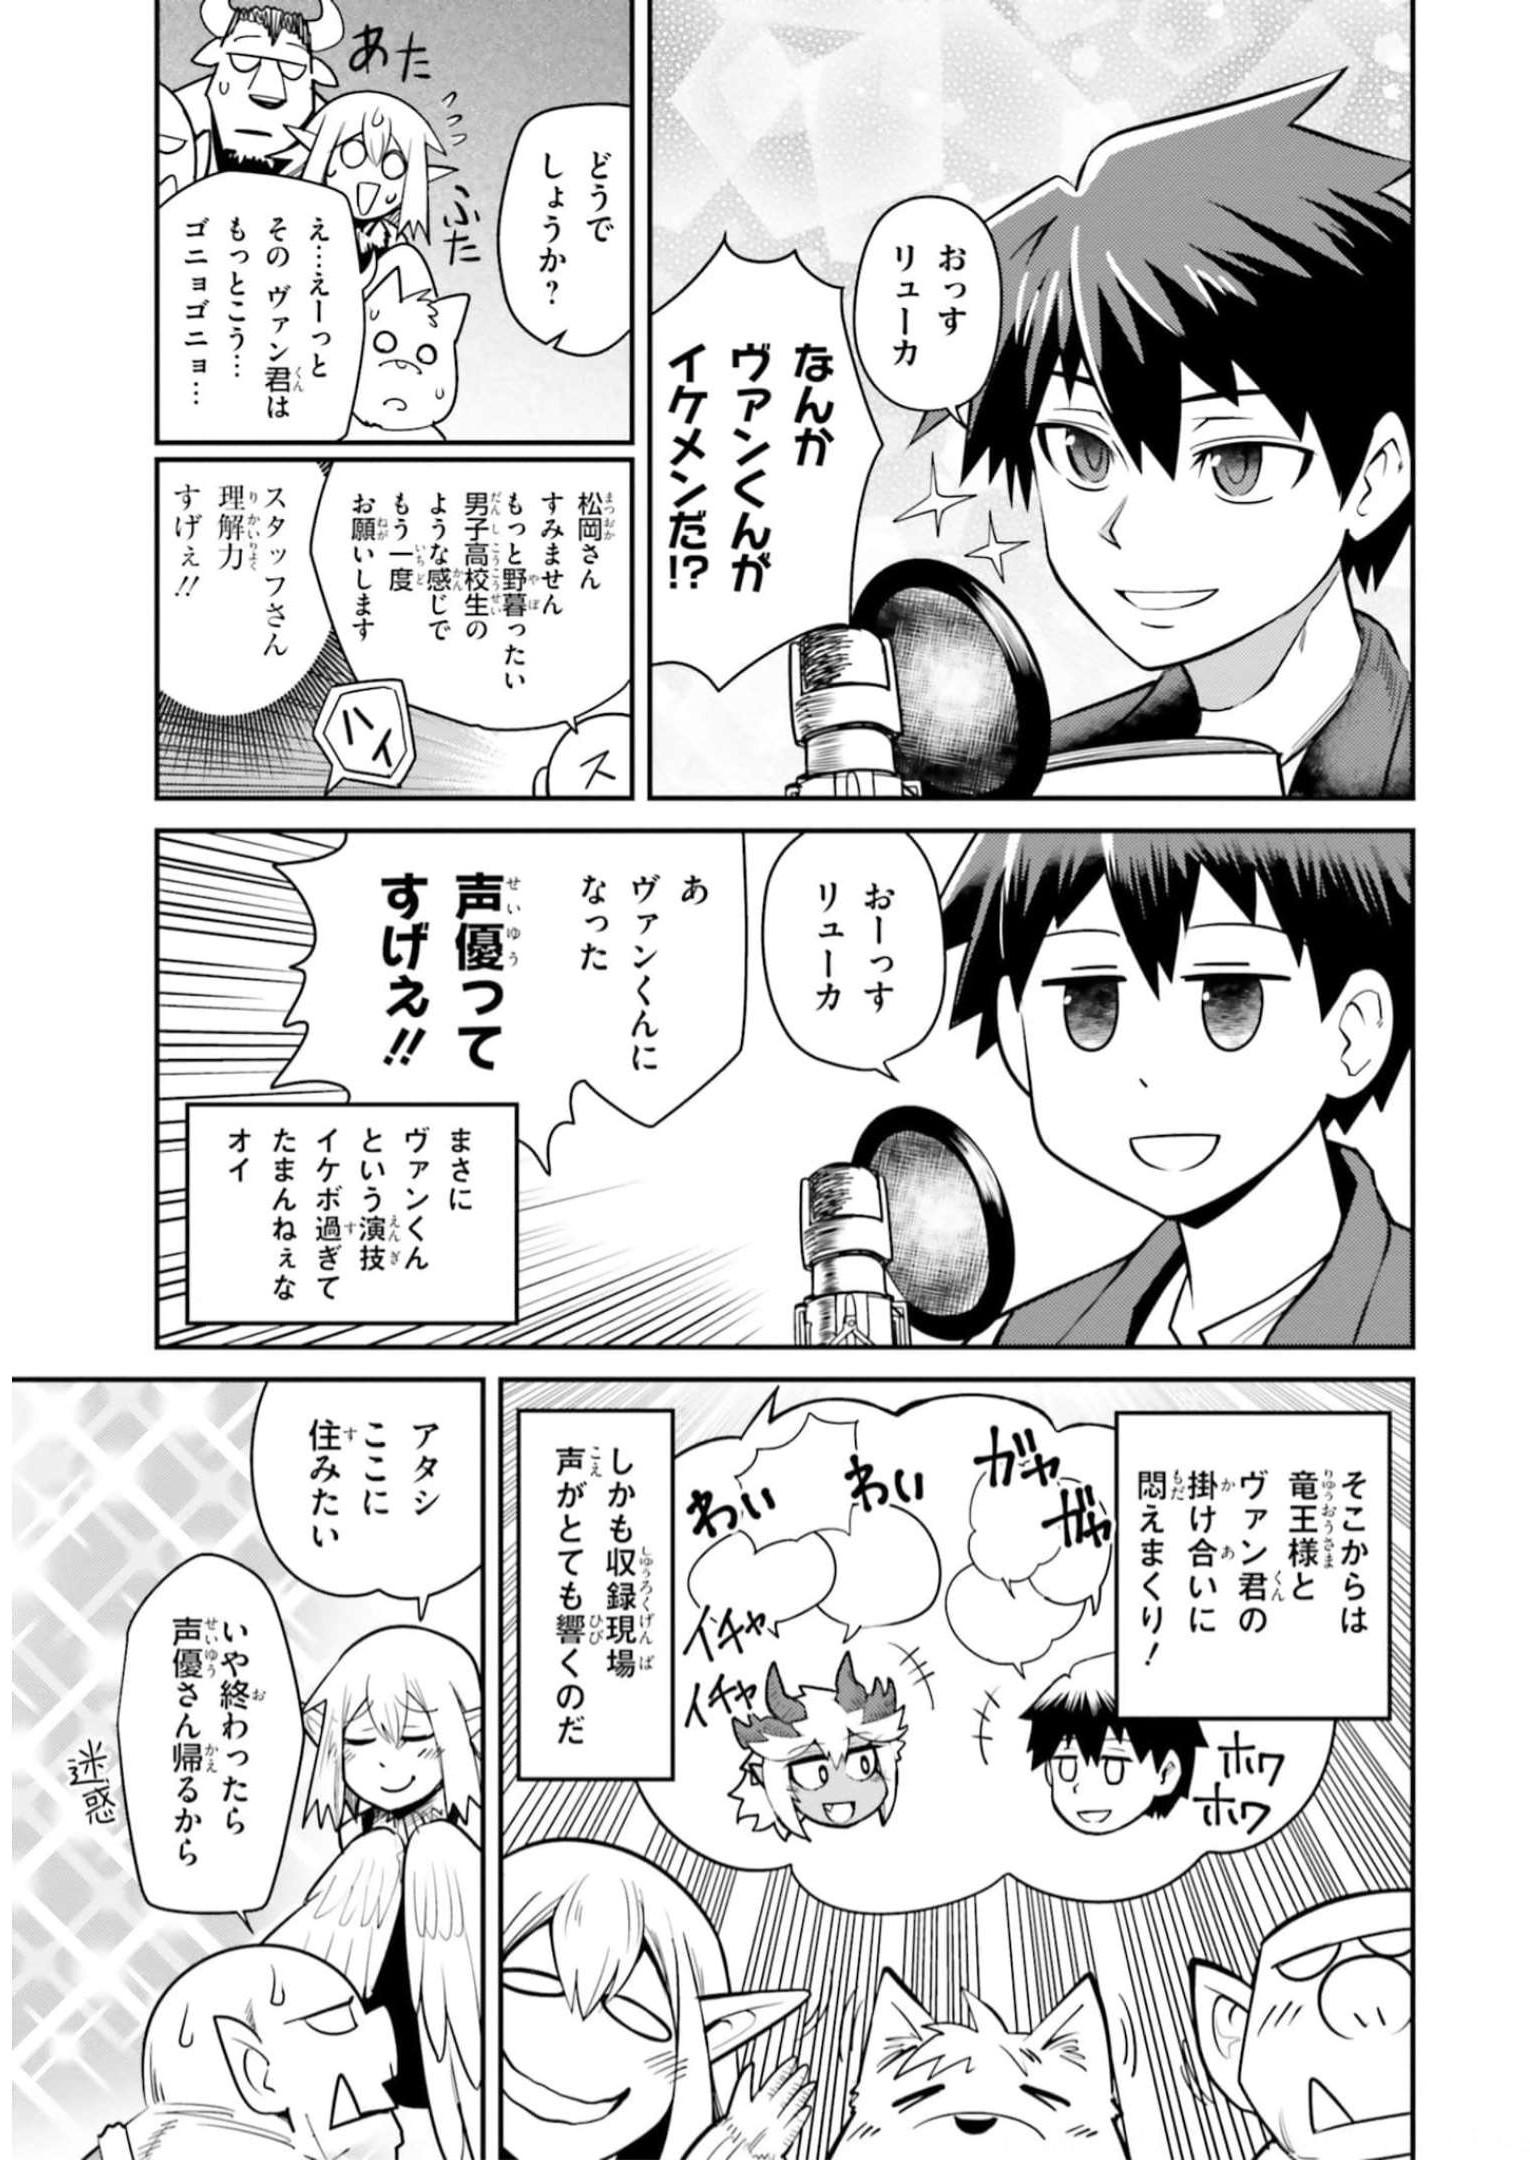 Dungeon Friends Forever Dungeon's Childhood Friend ダンジョンの幼なじみ 第18.2話 - Page 3